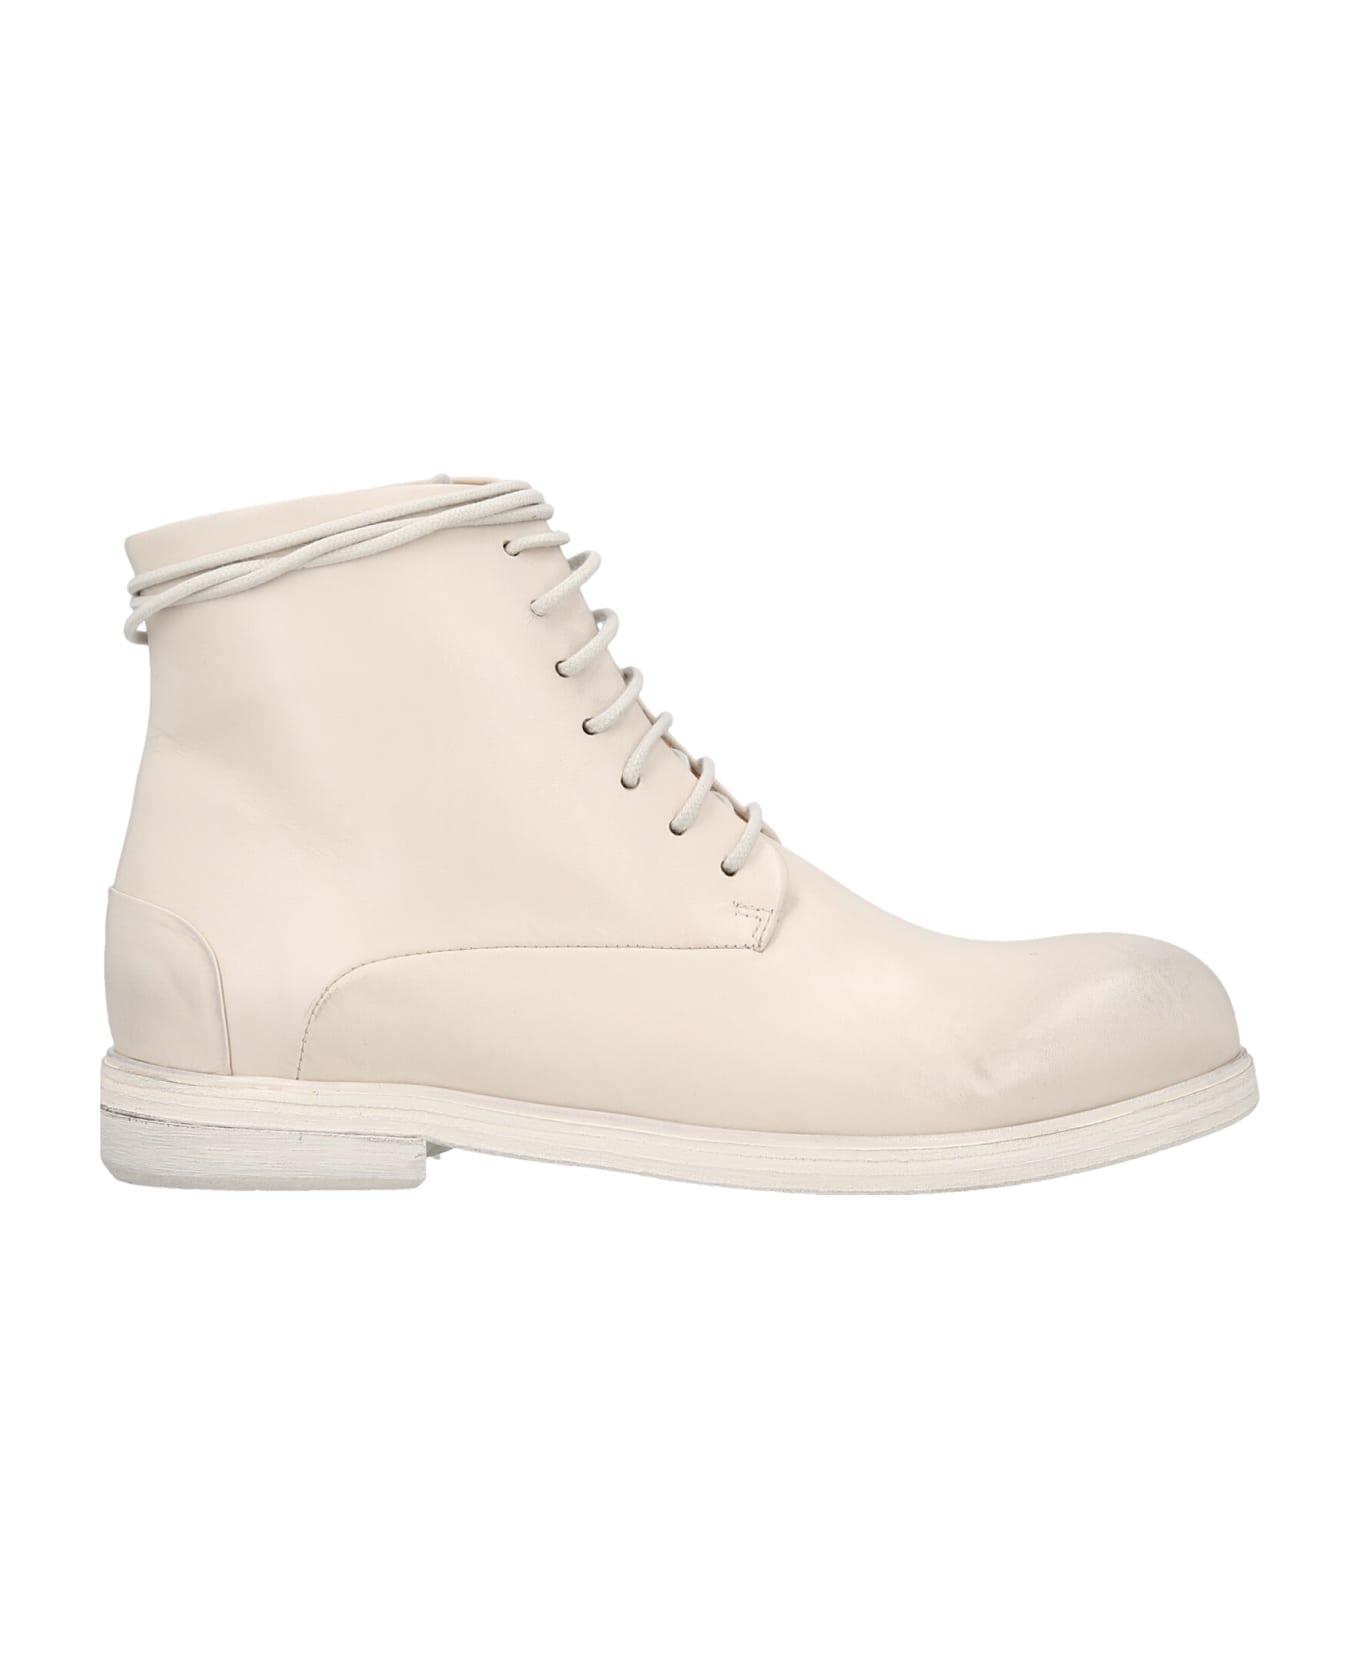 Marsell 'zucca Media' Ankle Boots - White ブーツ